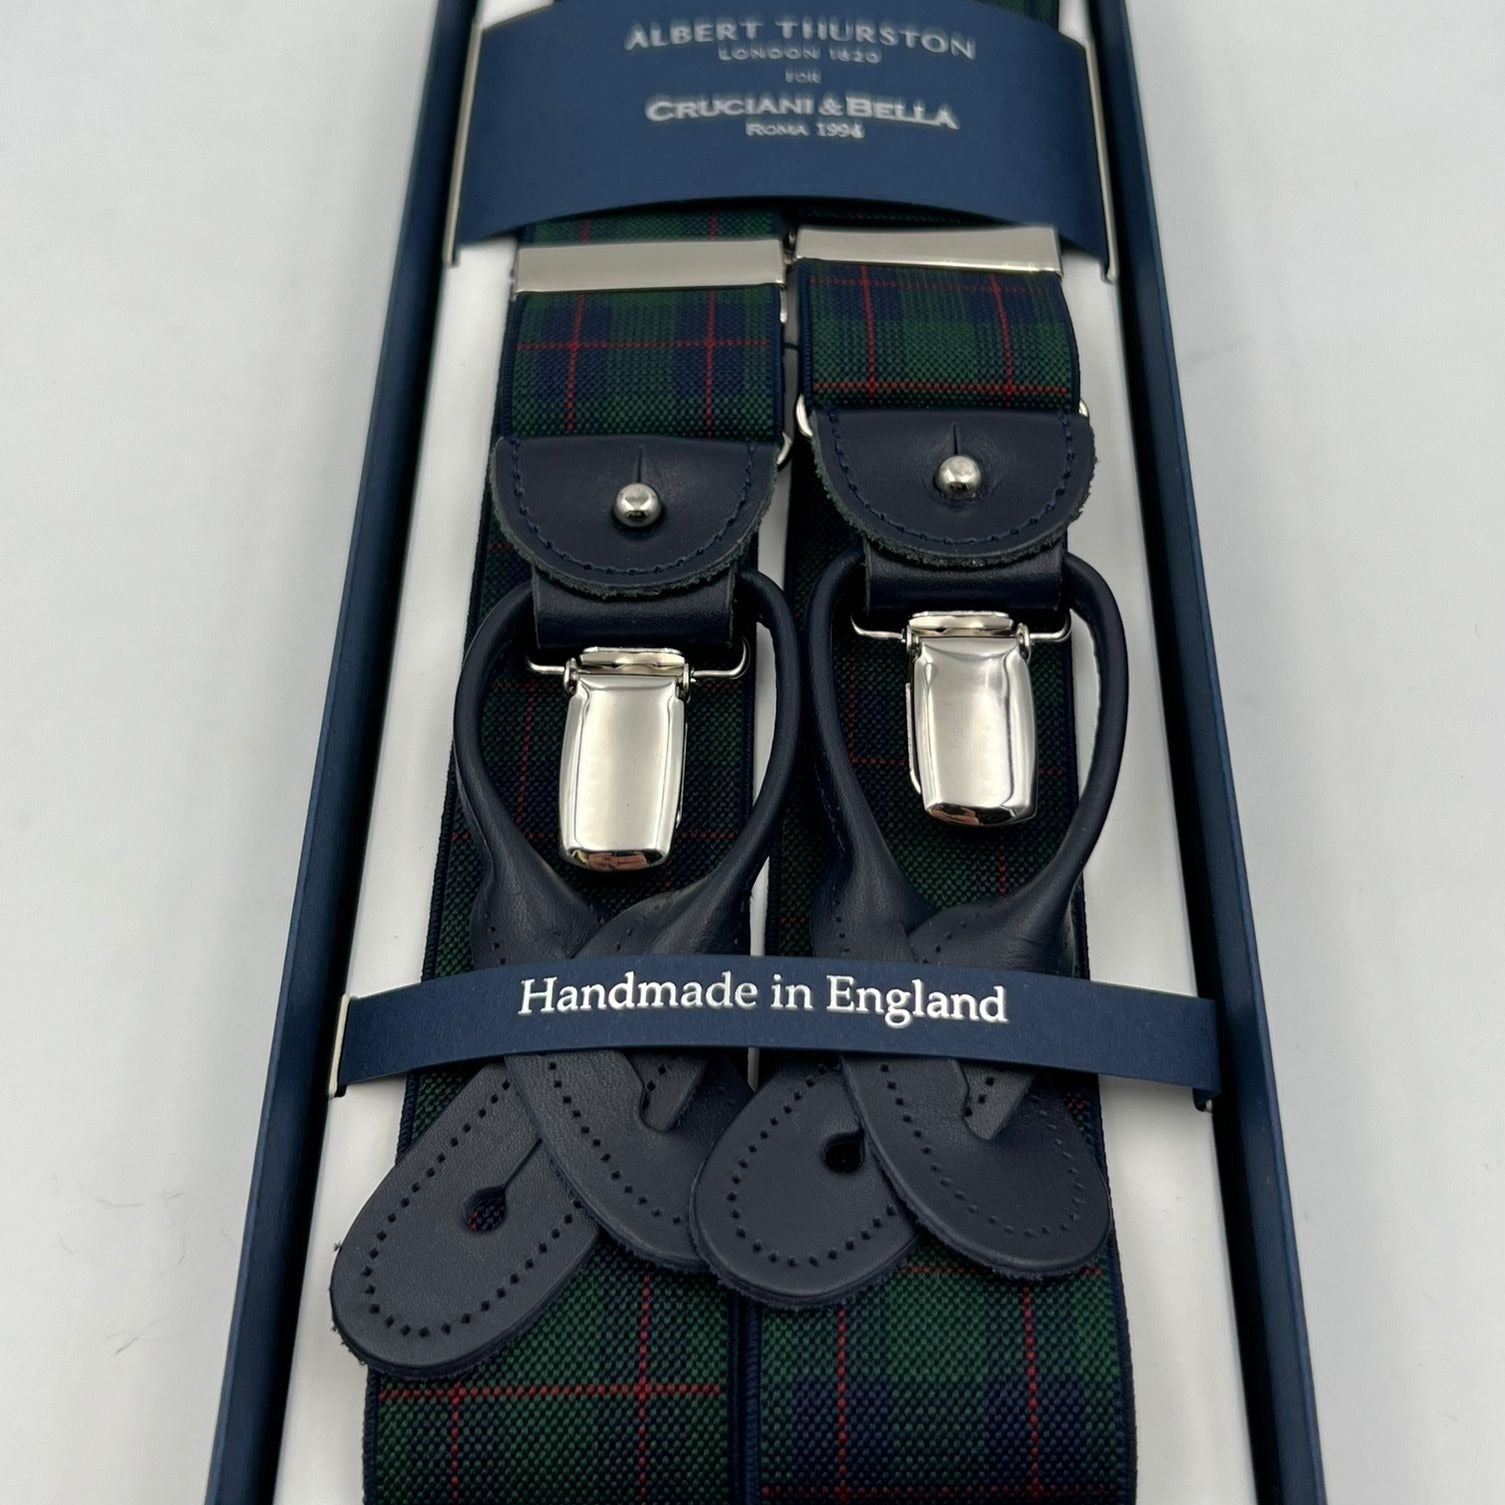 Albert Thurston for Cruciani & Bella Made in England 2 in 1 Adjustable Sizing 35 mm elastic braces Green Tartan Motif Y-Shaped Nickel Fittings Size Large #7389